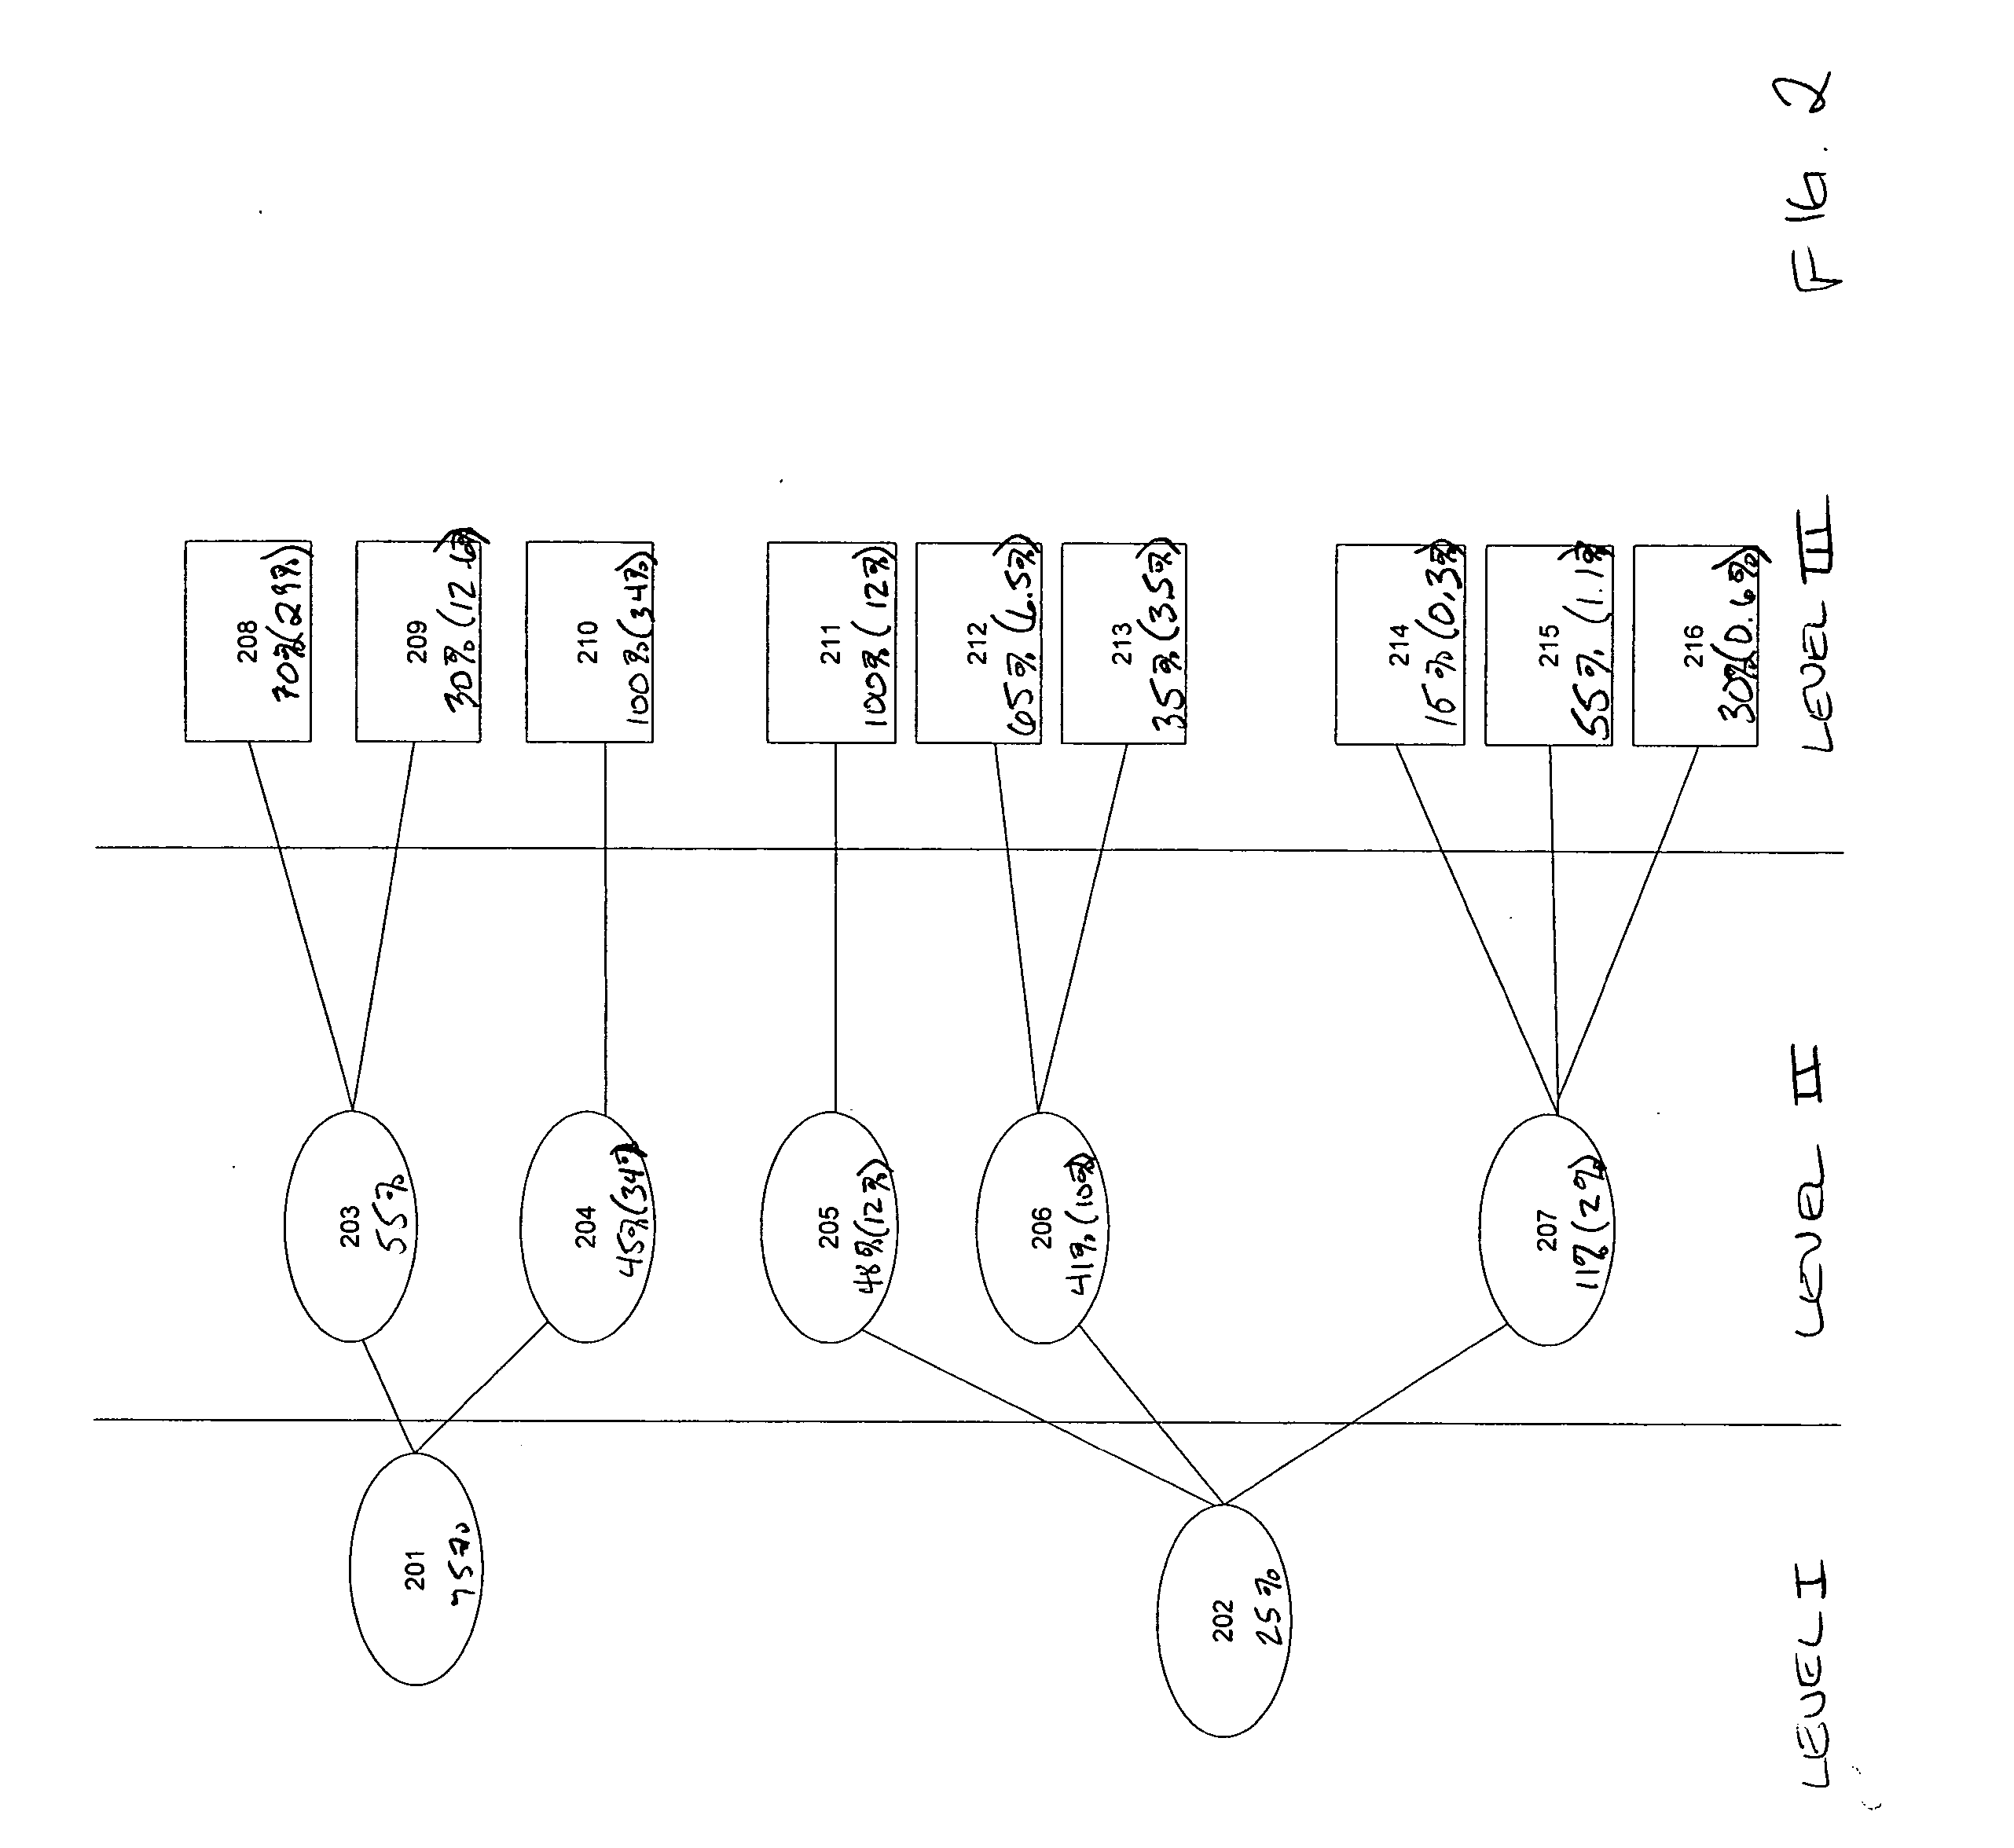 System and method for improved project portfolio management